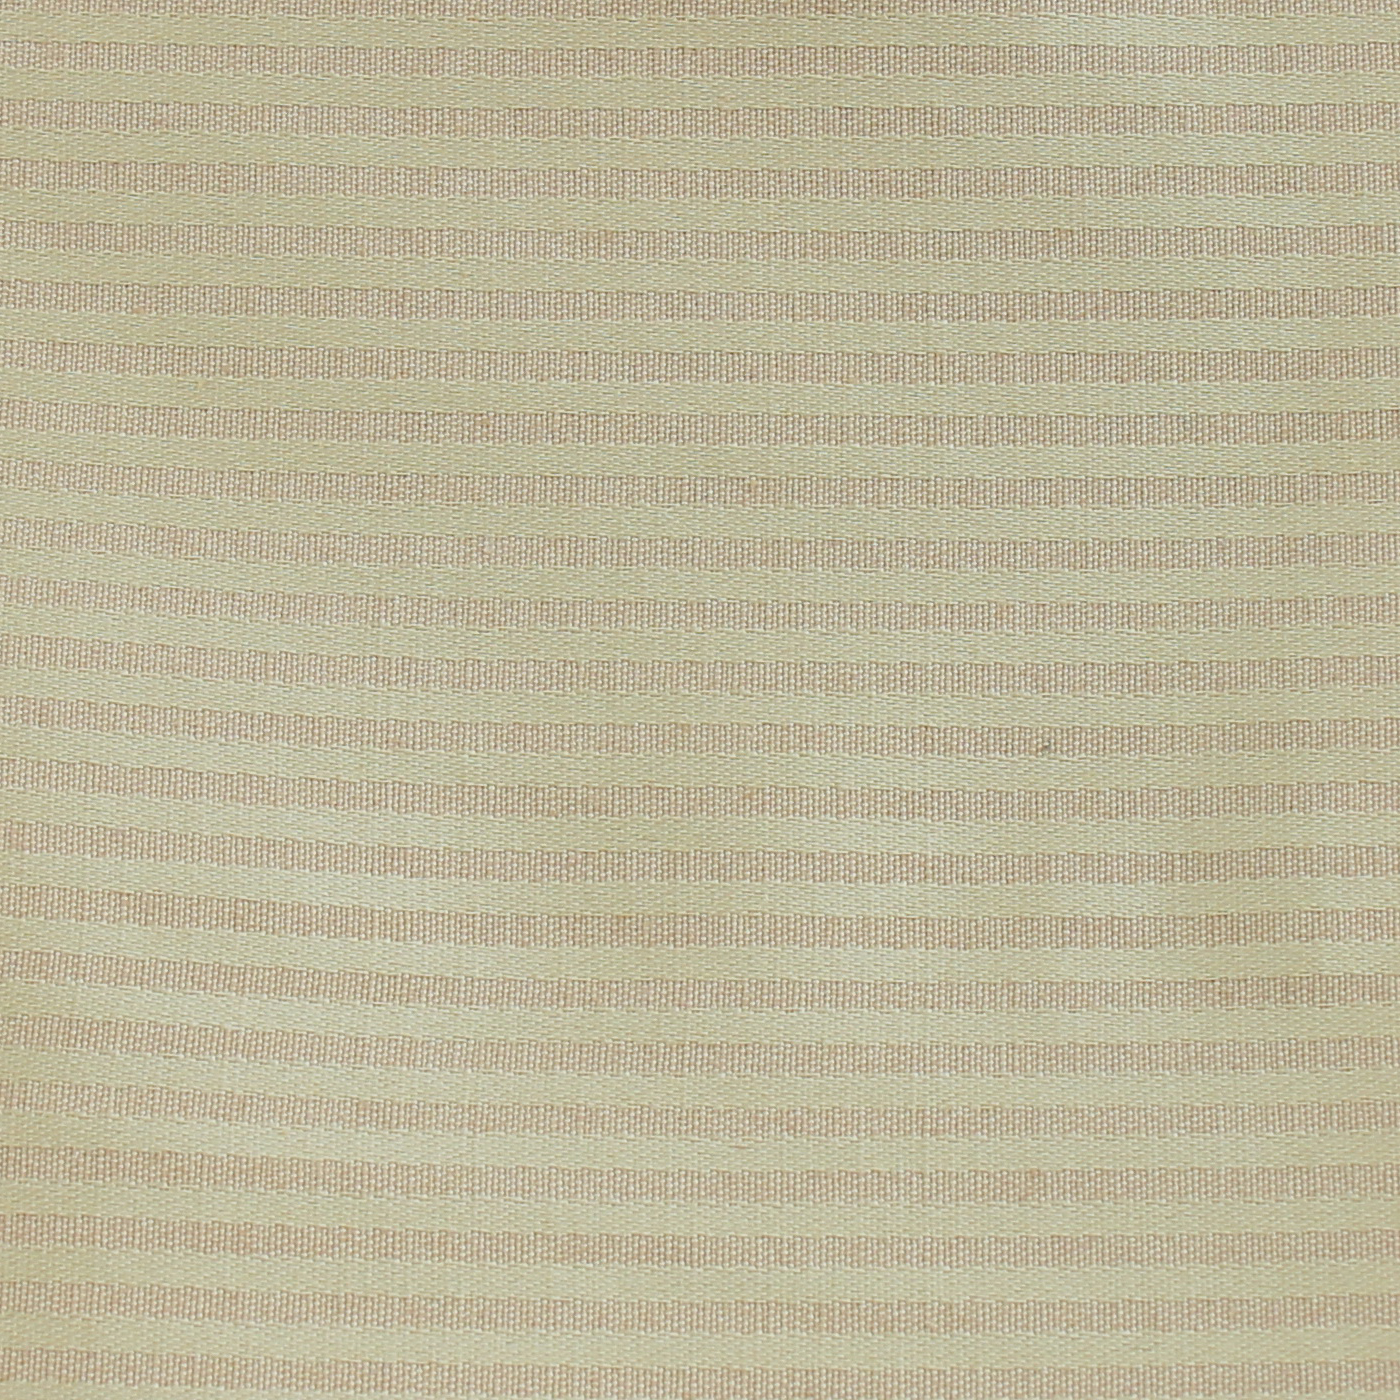 NO 2-45 RS X1 D NO 32 Fabric Upholstery Sample